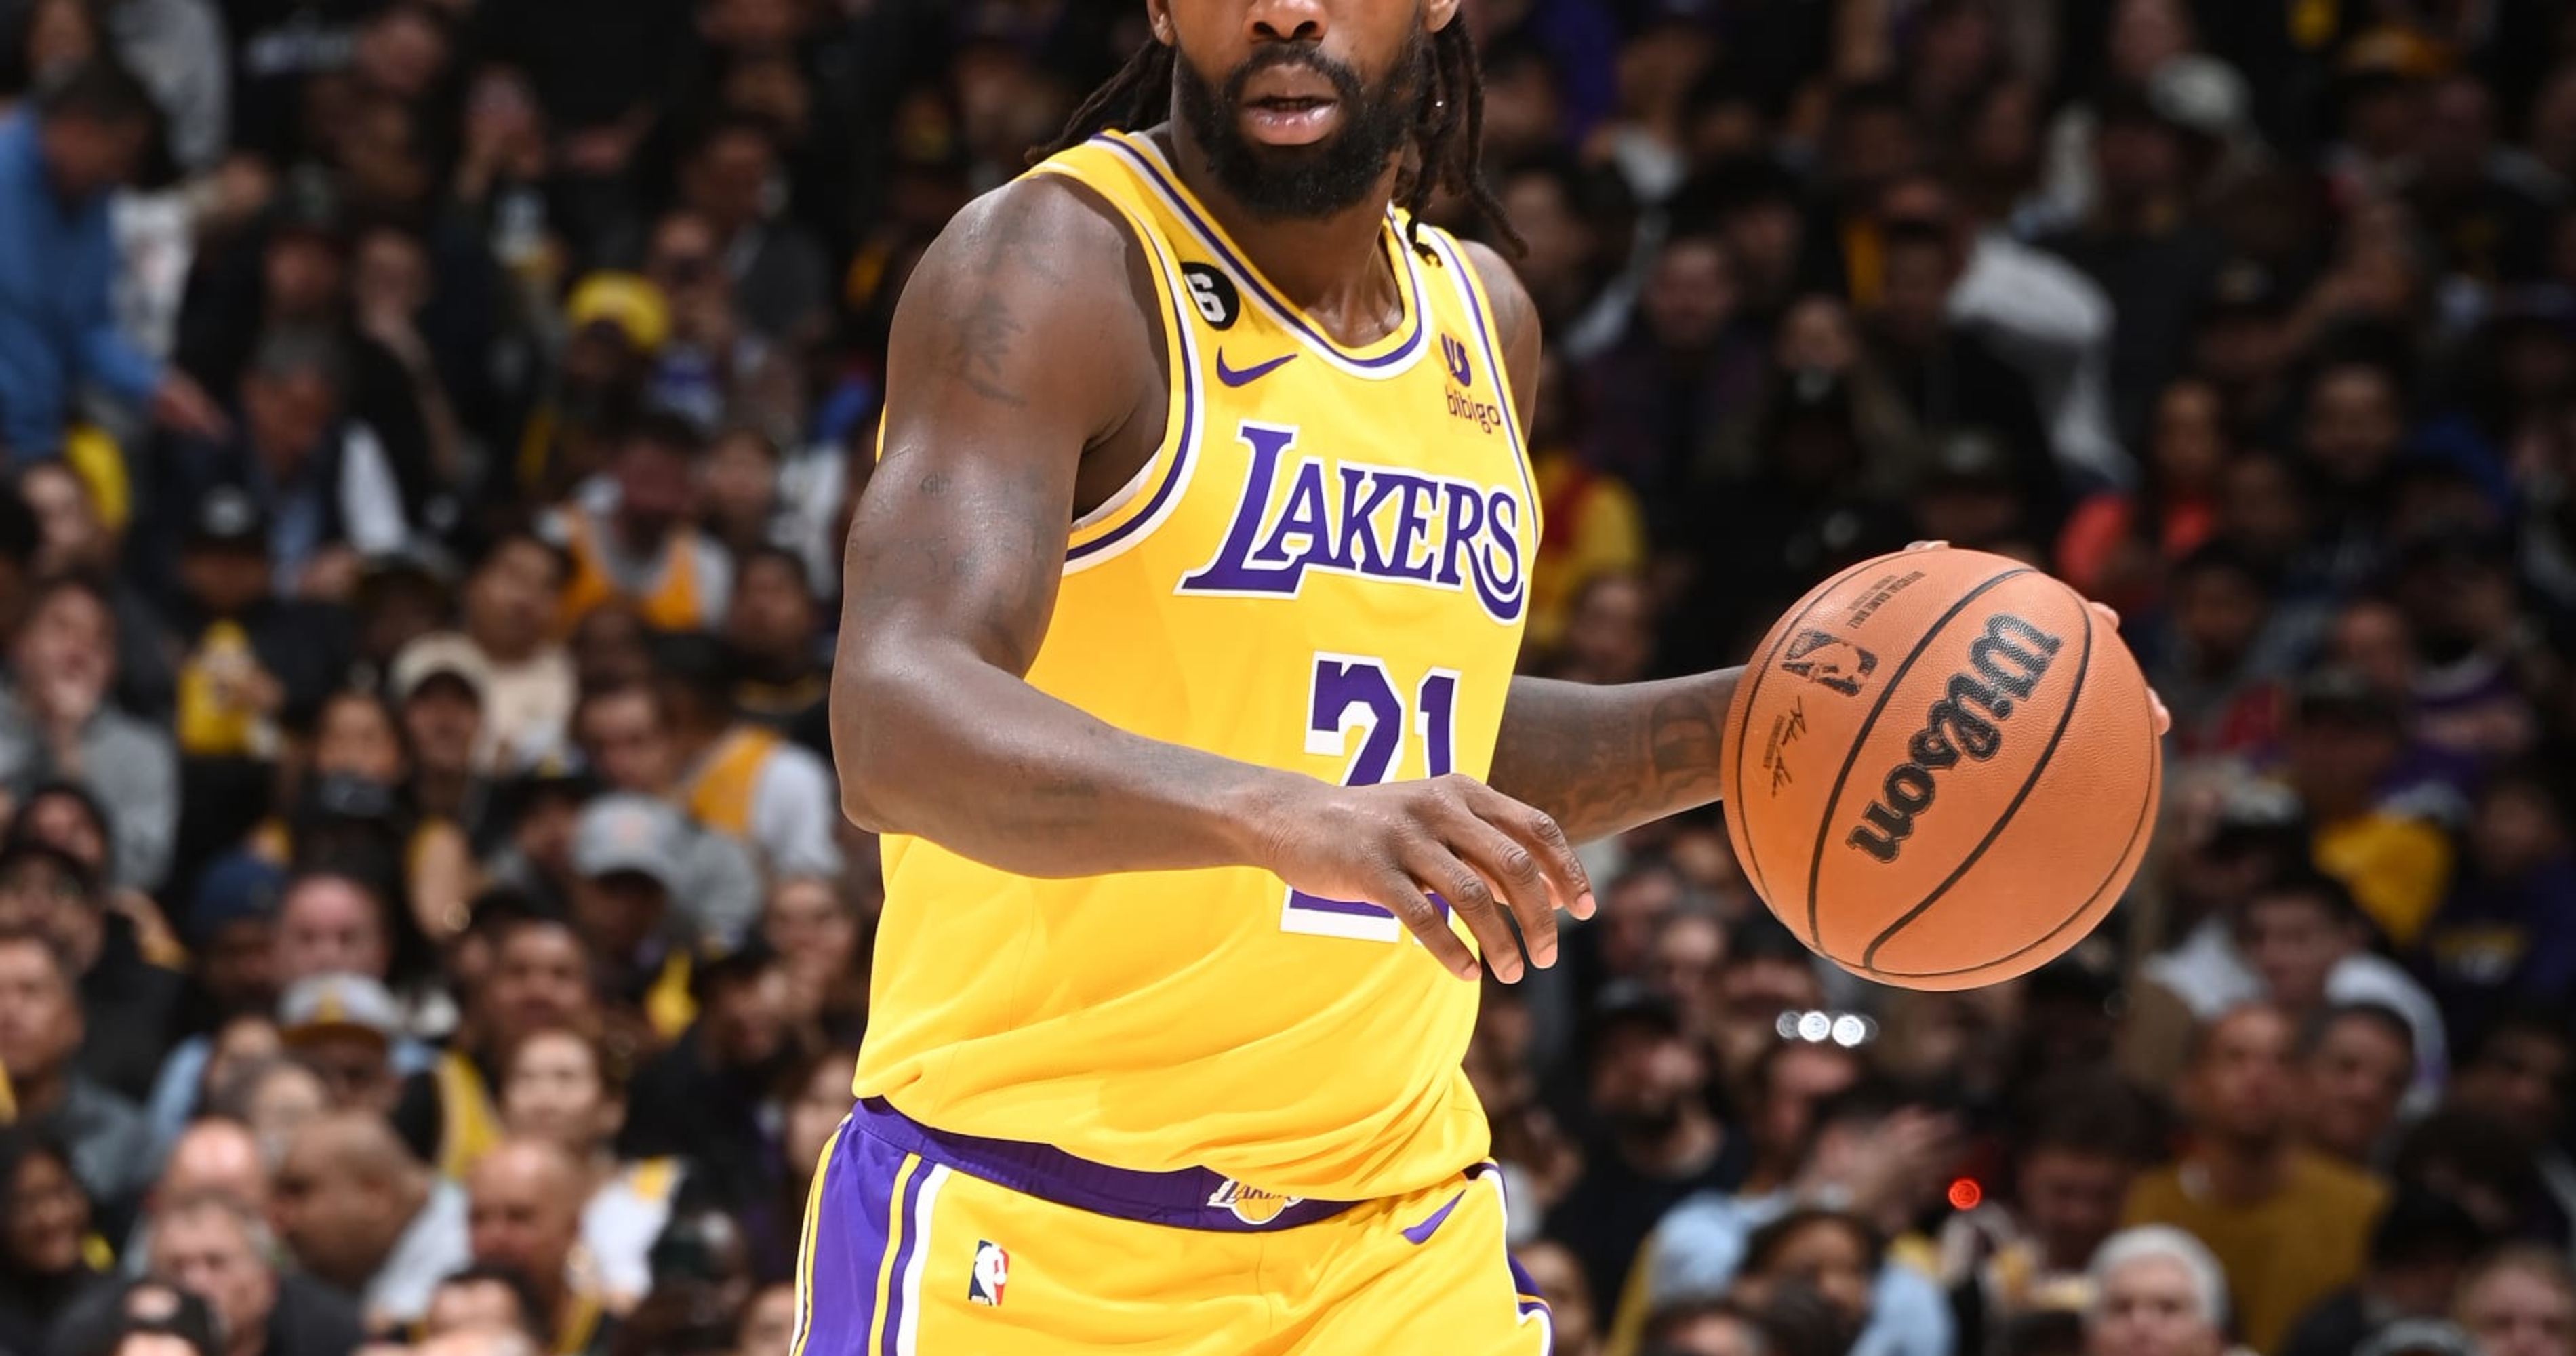 Lakers News: Patrick Beverley To Miss Second Straight Game Against